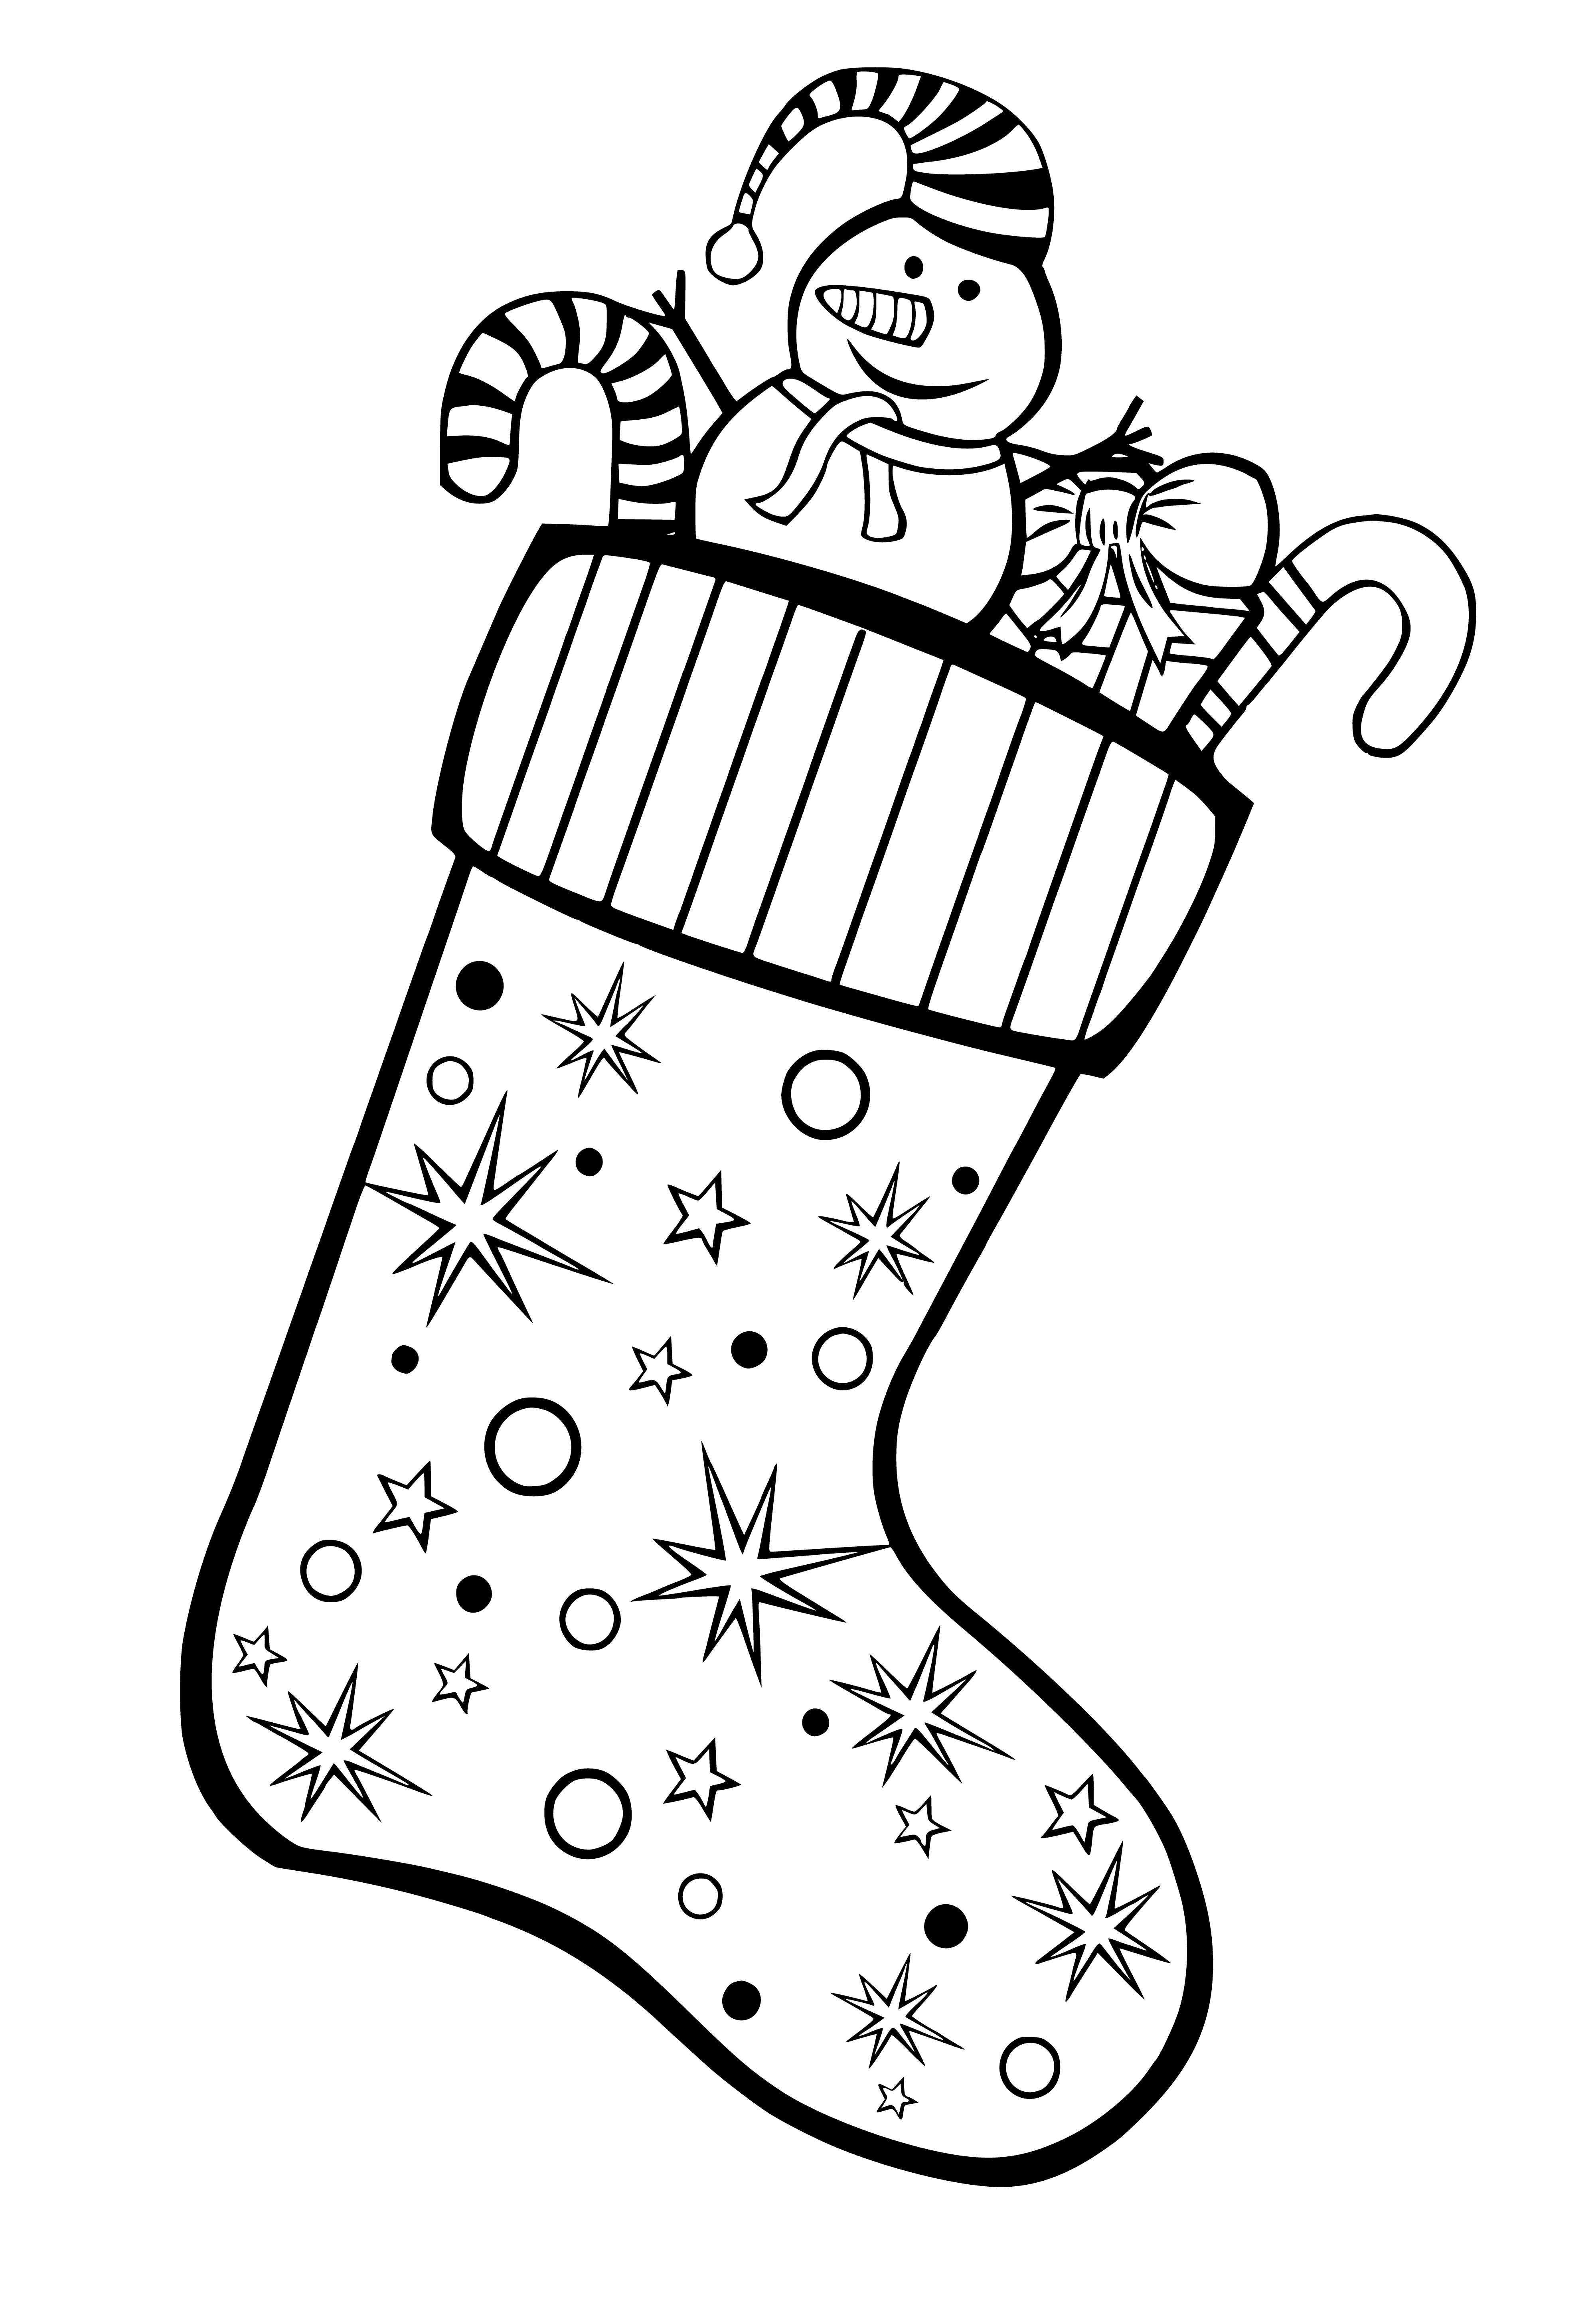 coloring page: Red & white striped Christmas socks with green top band- perfect for the holiday season! #ChristmasIsComing